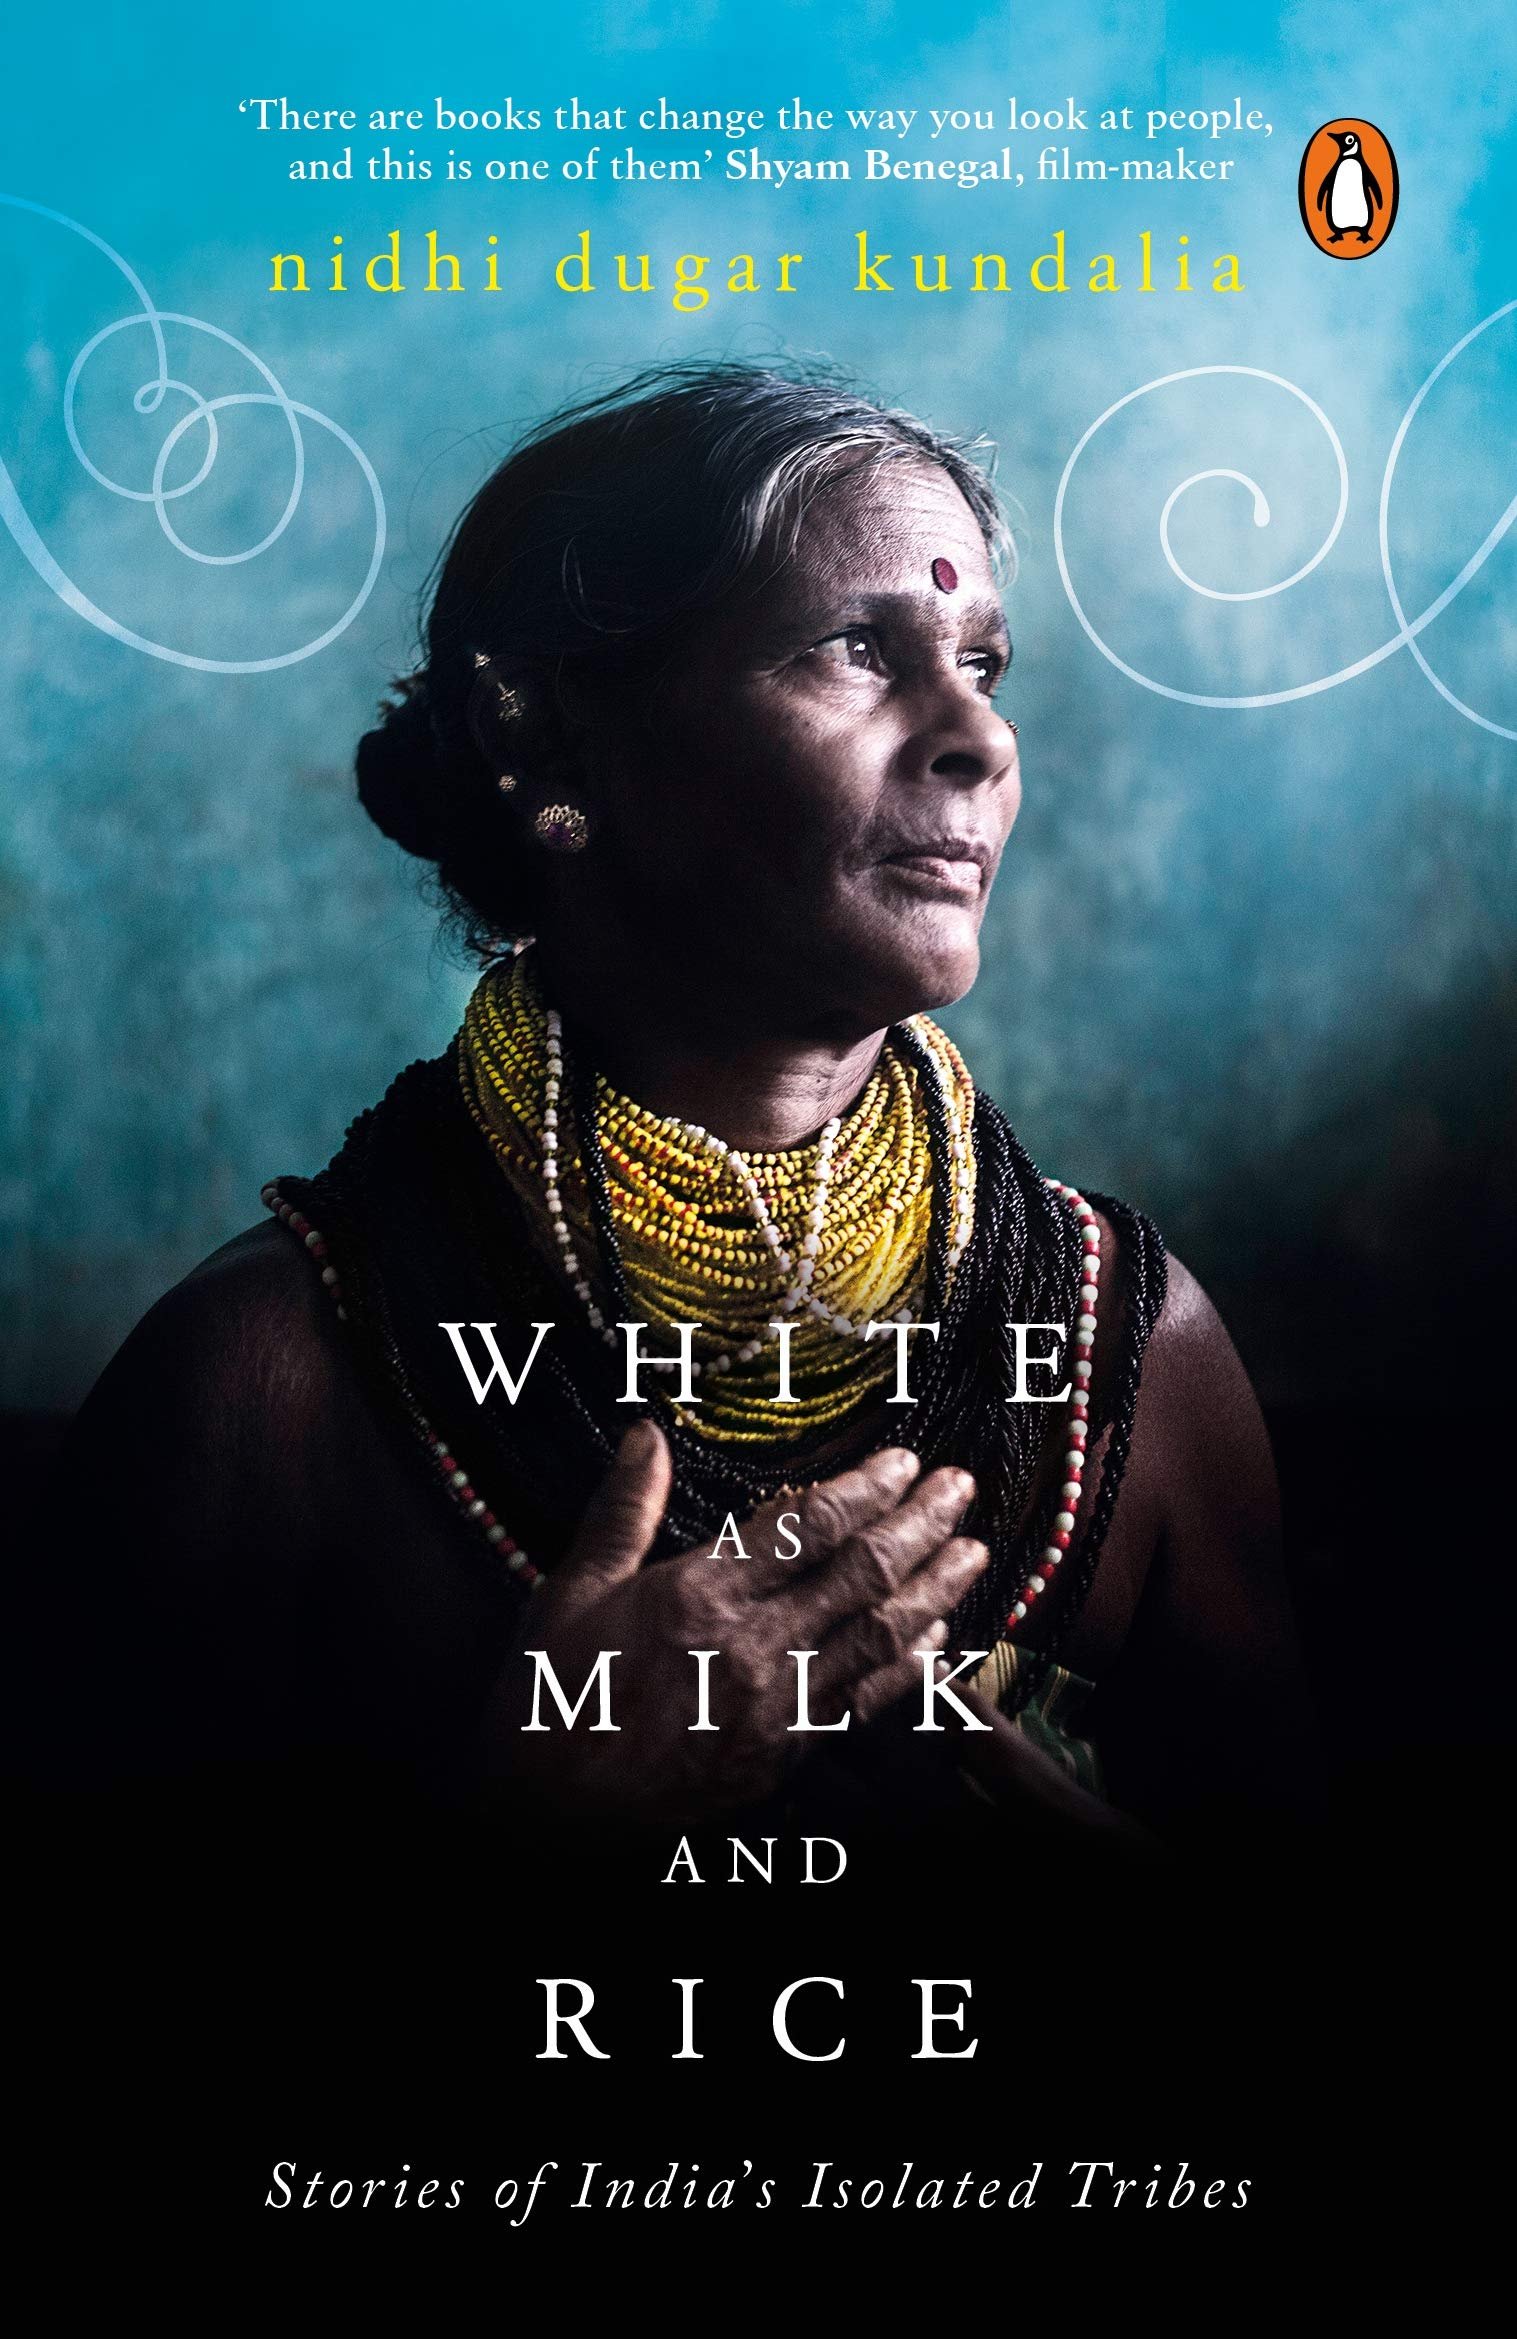 White as Milk and Rice by Nidhi Dugar Kundalia depicts unheard stories of tribal innocence and ferociousness